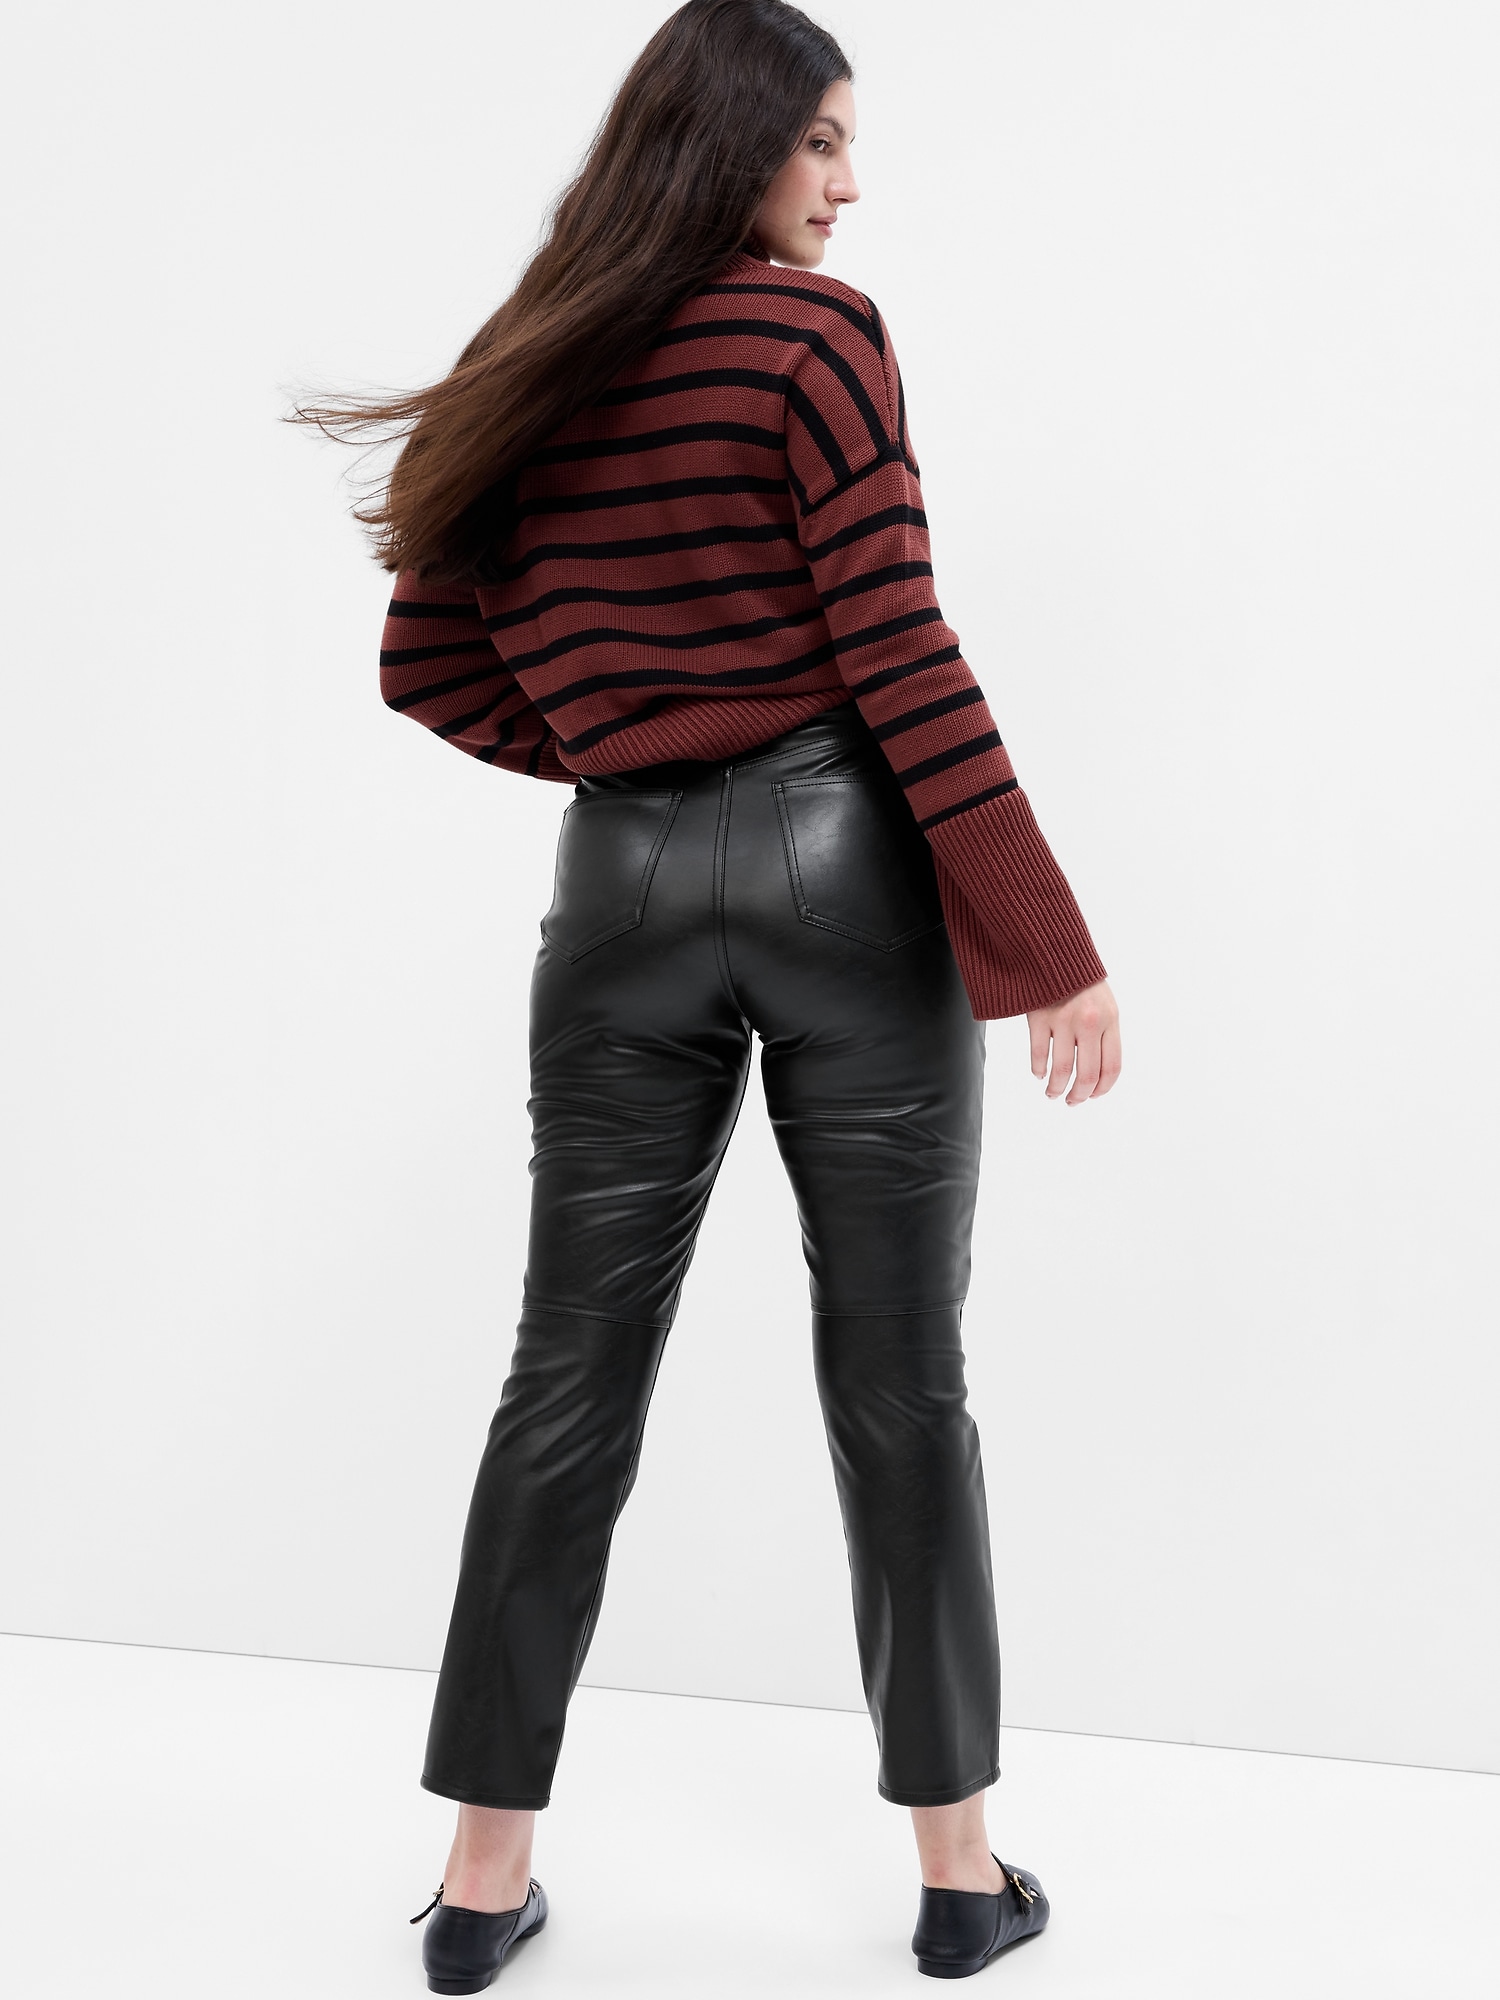 Top 10 leather leggings with boots ideas and inspiration